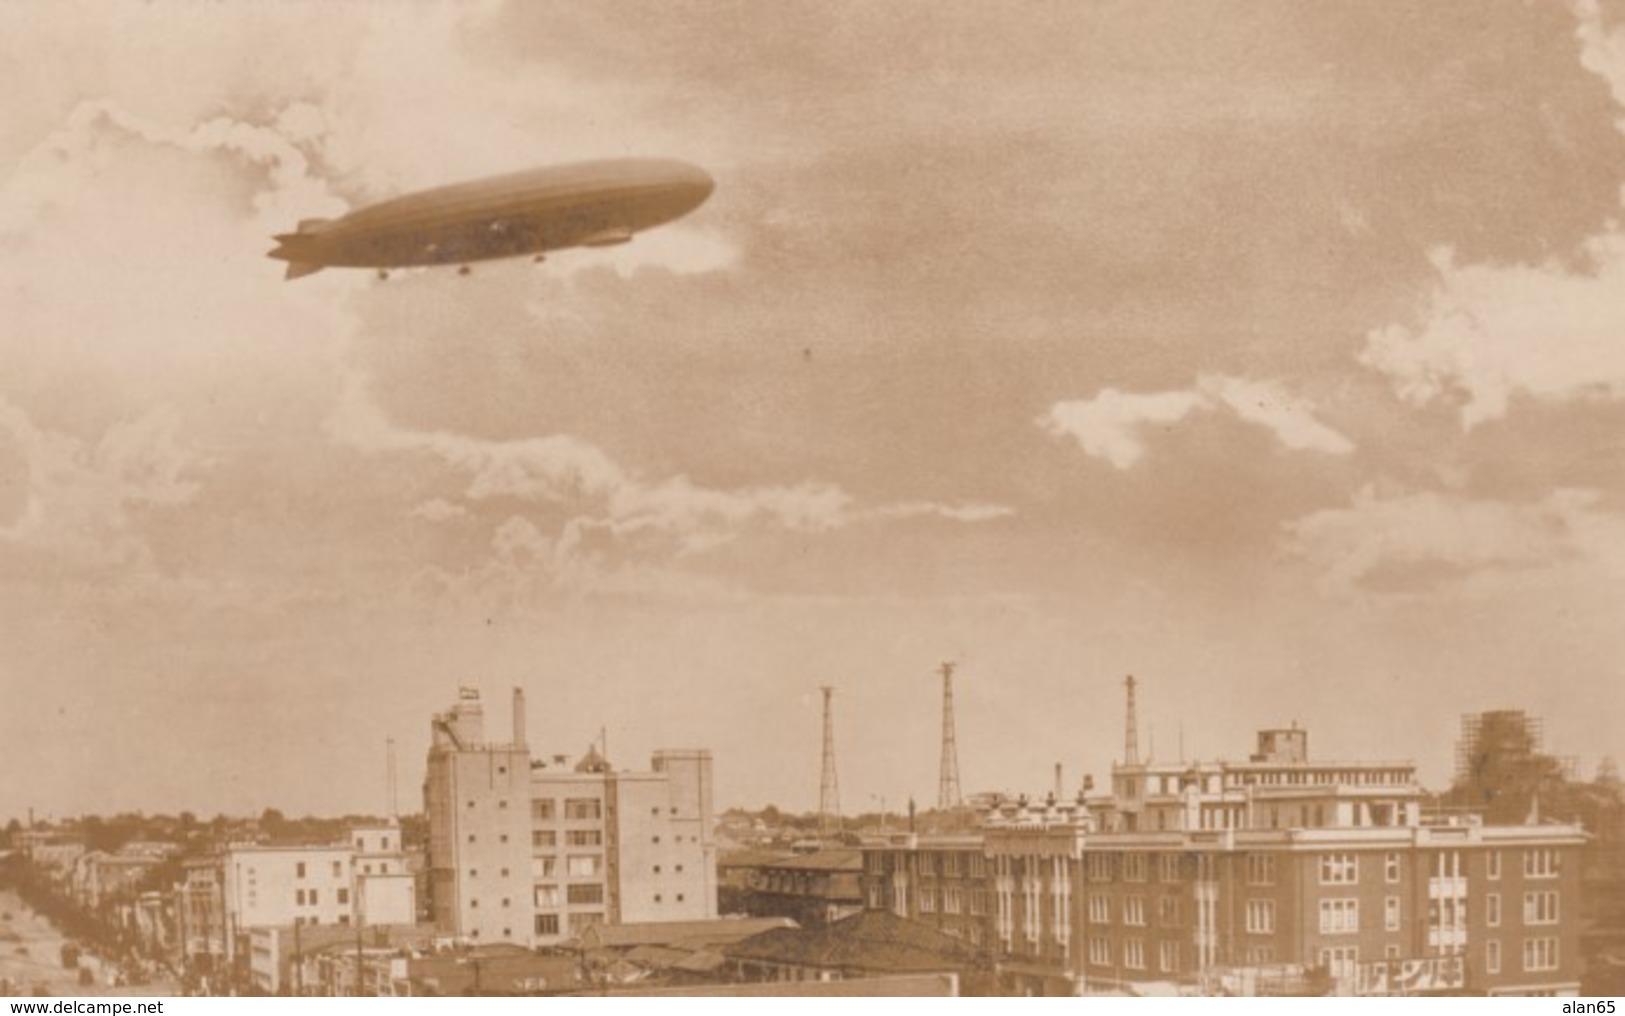 Air Ship Dirigible Over City and near Hangar, Lot of 4 Different c1920s/30s Vintage Photos